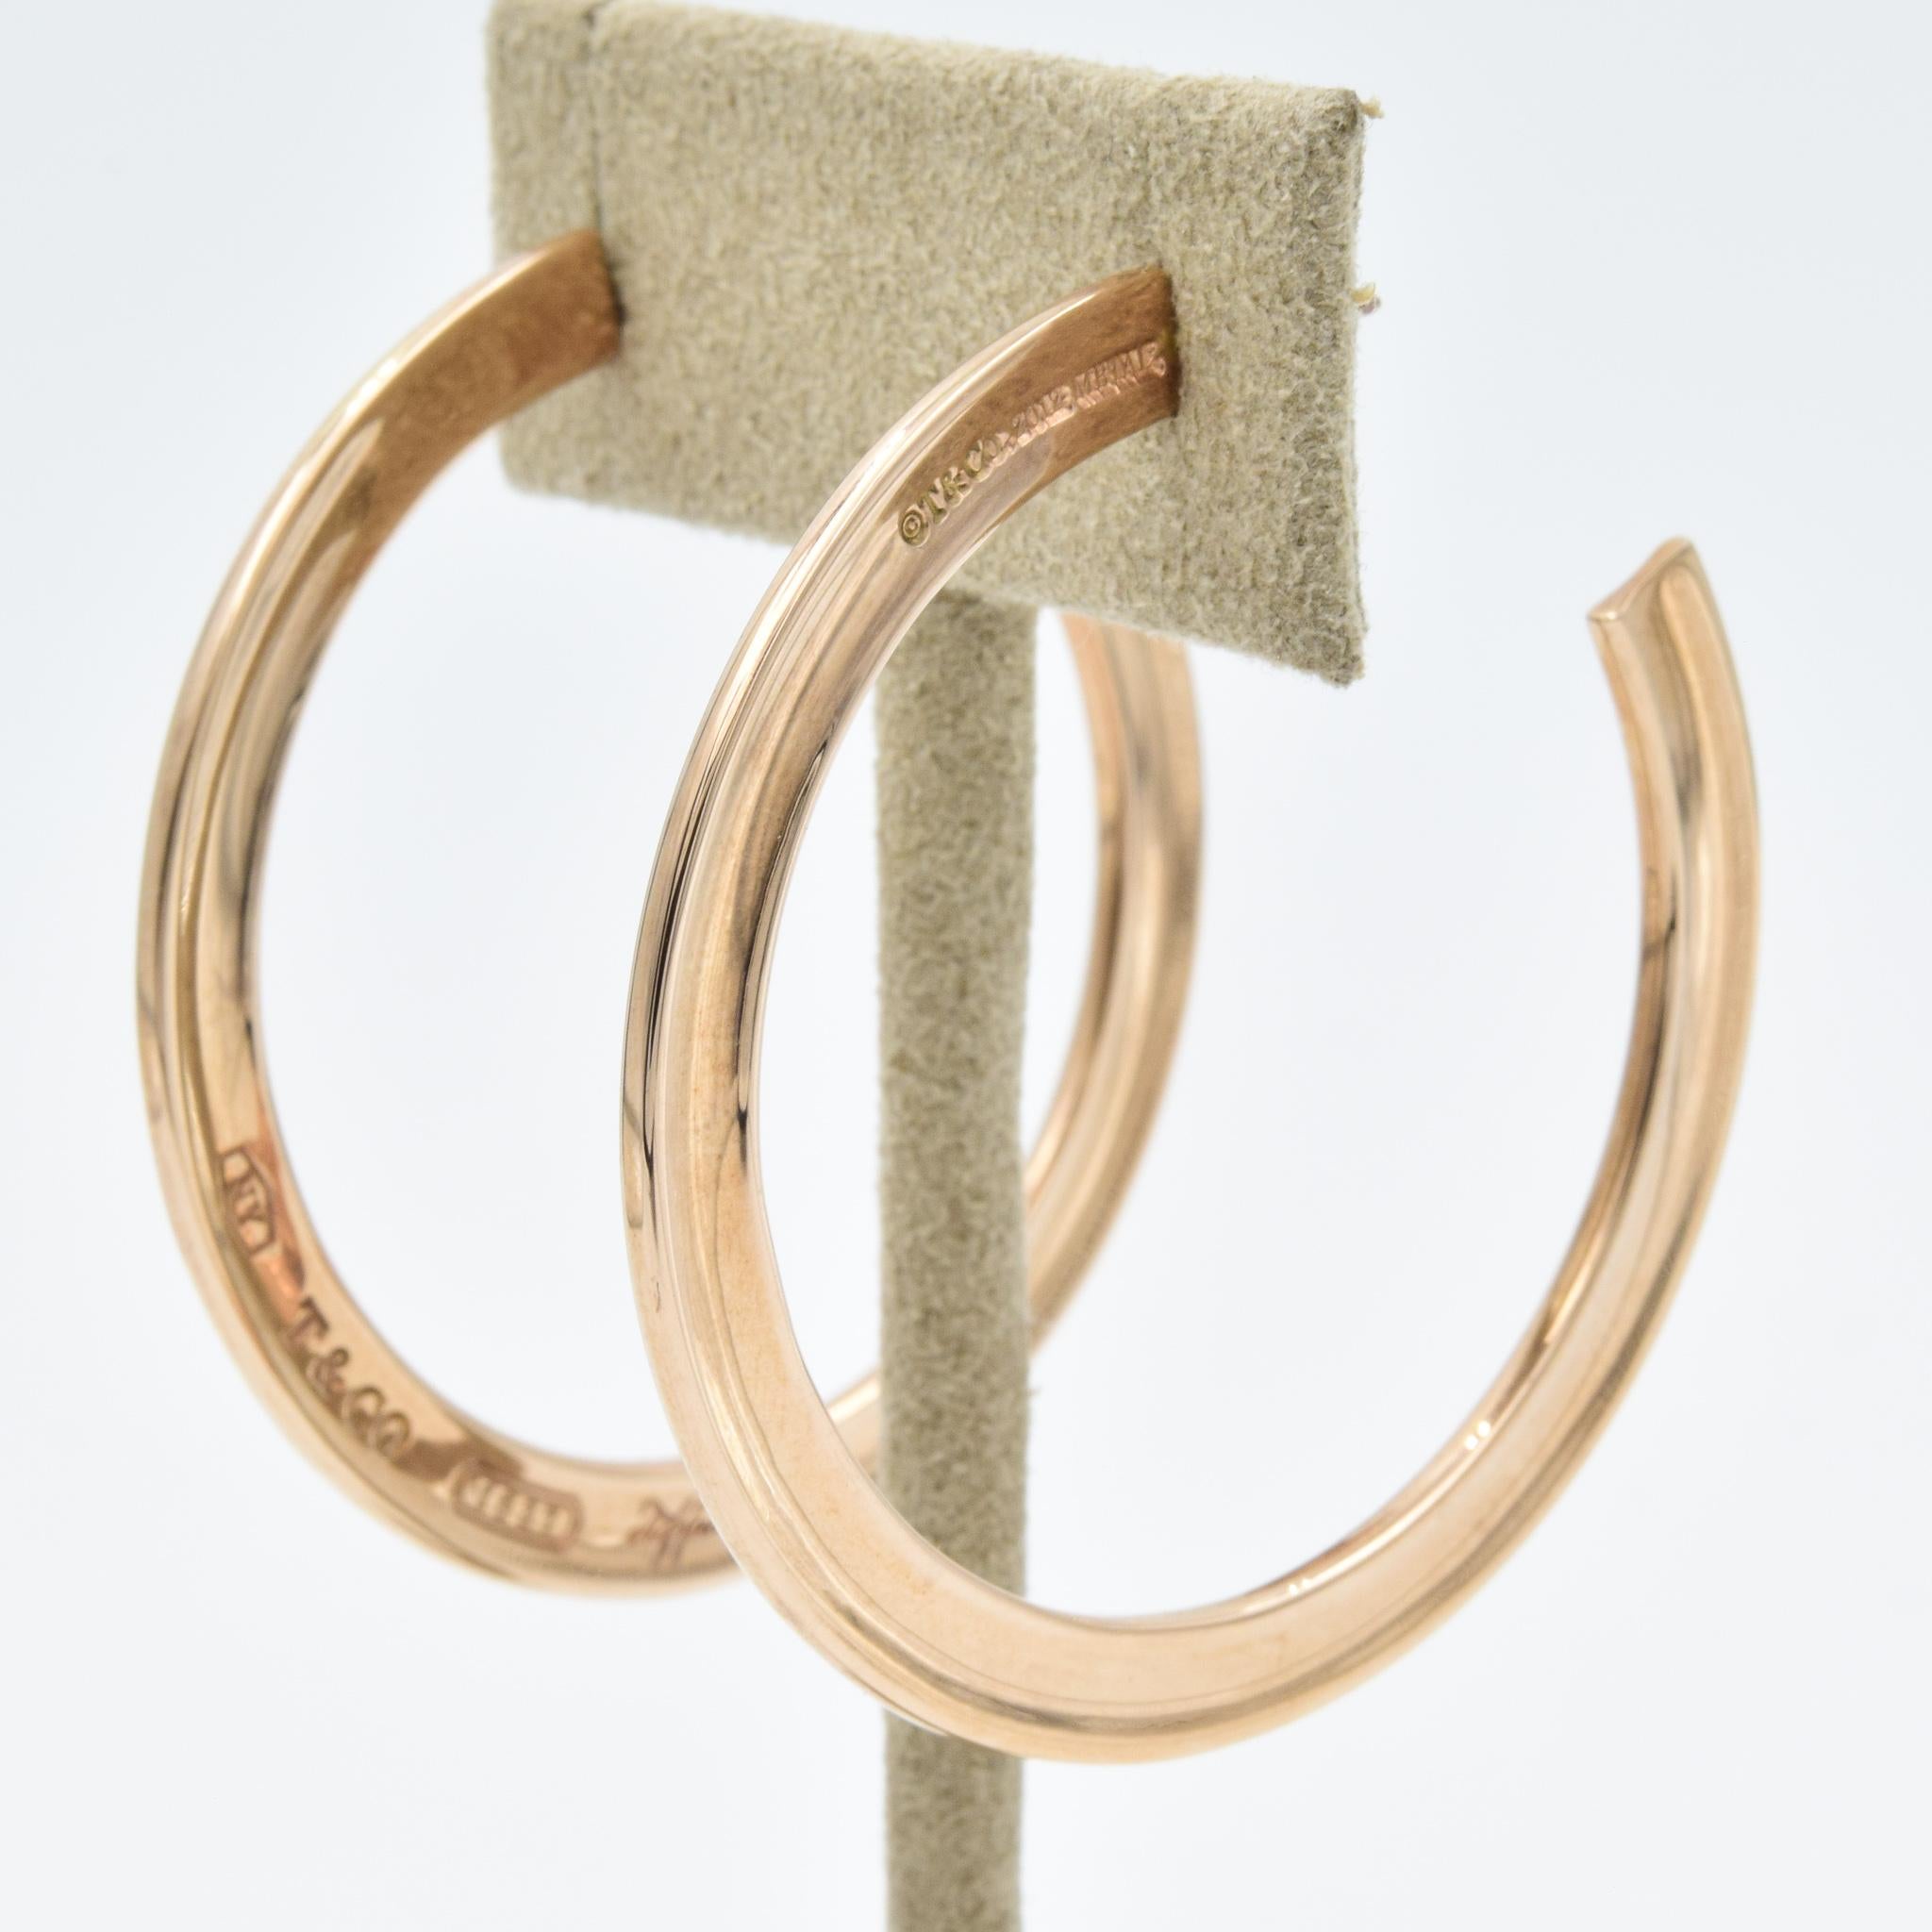 These Tiffany and Co. Rubedo hoop earrings were recently traded in to our store and are in very good condition. Rubedo is a special blend of copper, gold, and a few other metals. These earrings are roughly 5cm in diameter.